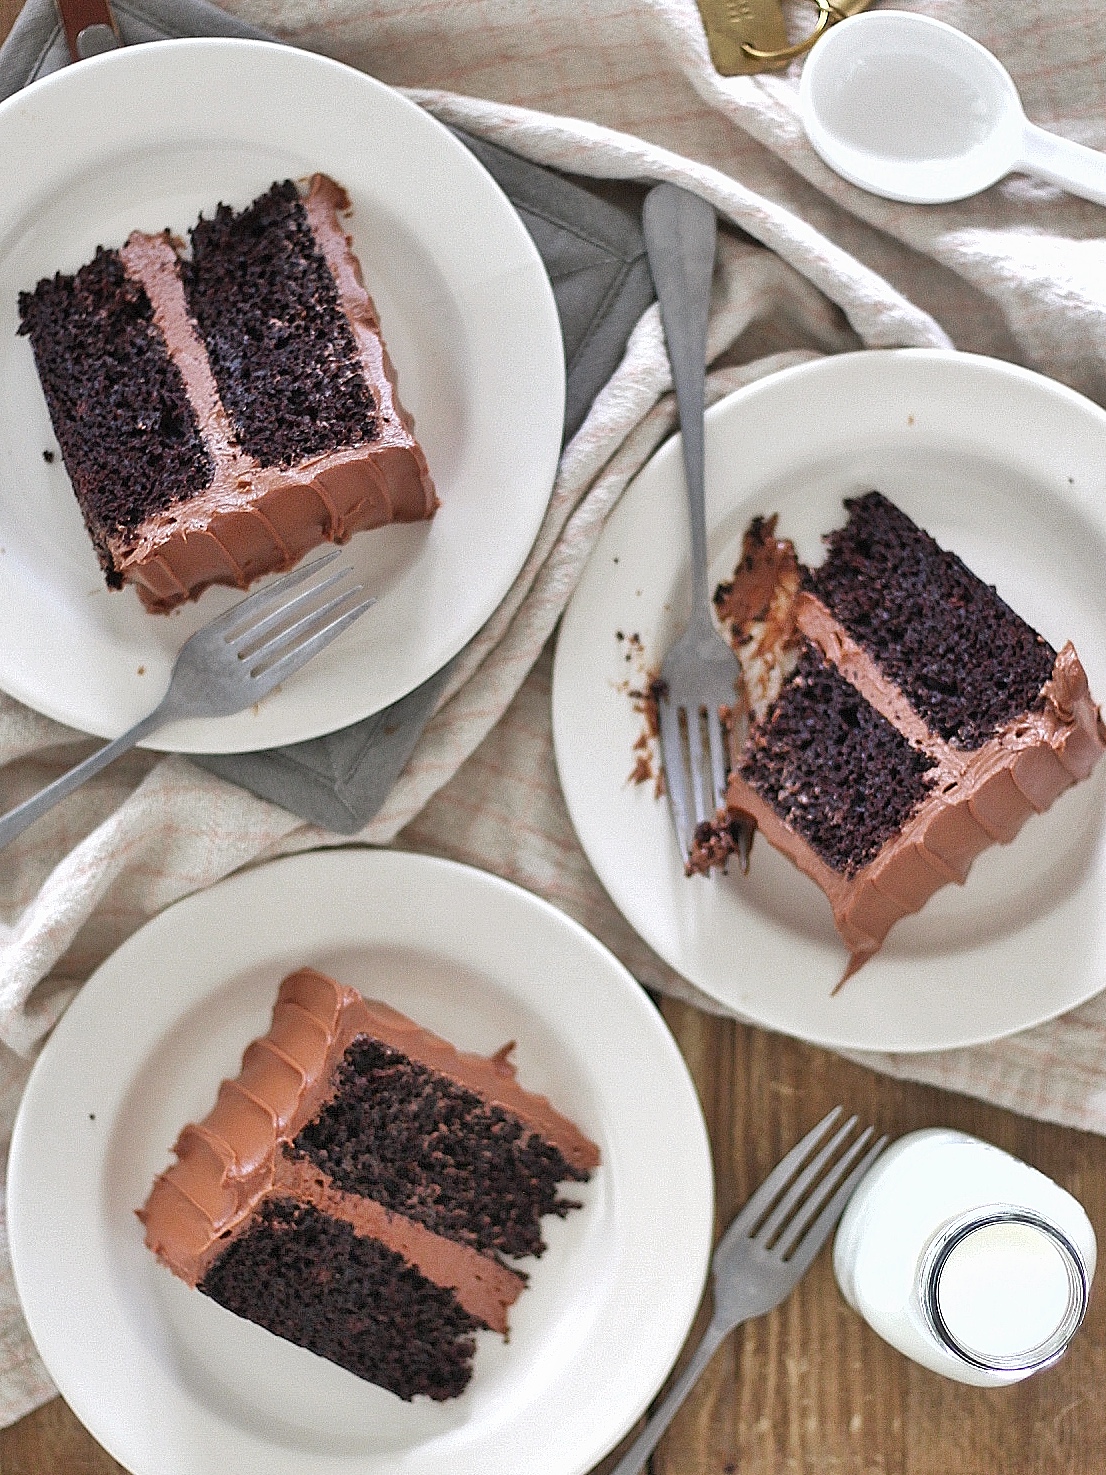 The Most Delicious Chocolate Cake - rich, moist and decadent chocolate cake layers with silky smooth chocolate buttercream #chocolatecake #bestchocolatecake #favoritechocolatecake #easychocolatecake #easychocolatecake #easychocolatecakerecipe #chocolatecakerecipe #chocolate #chocolateicing #icingrecipe #frostingrecipe #chocolatefrochokecake #chocolatefrohowseasy #chocolatecake birthdaycake #howtomakebuttercreamfrosting